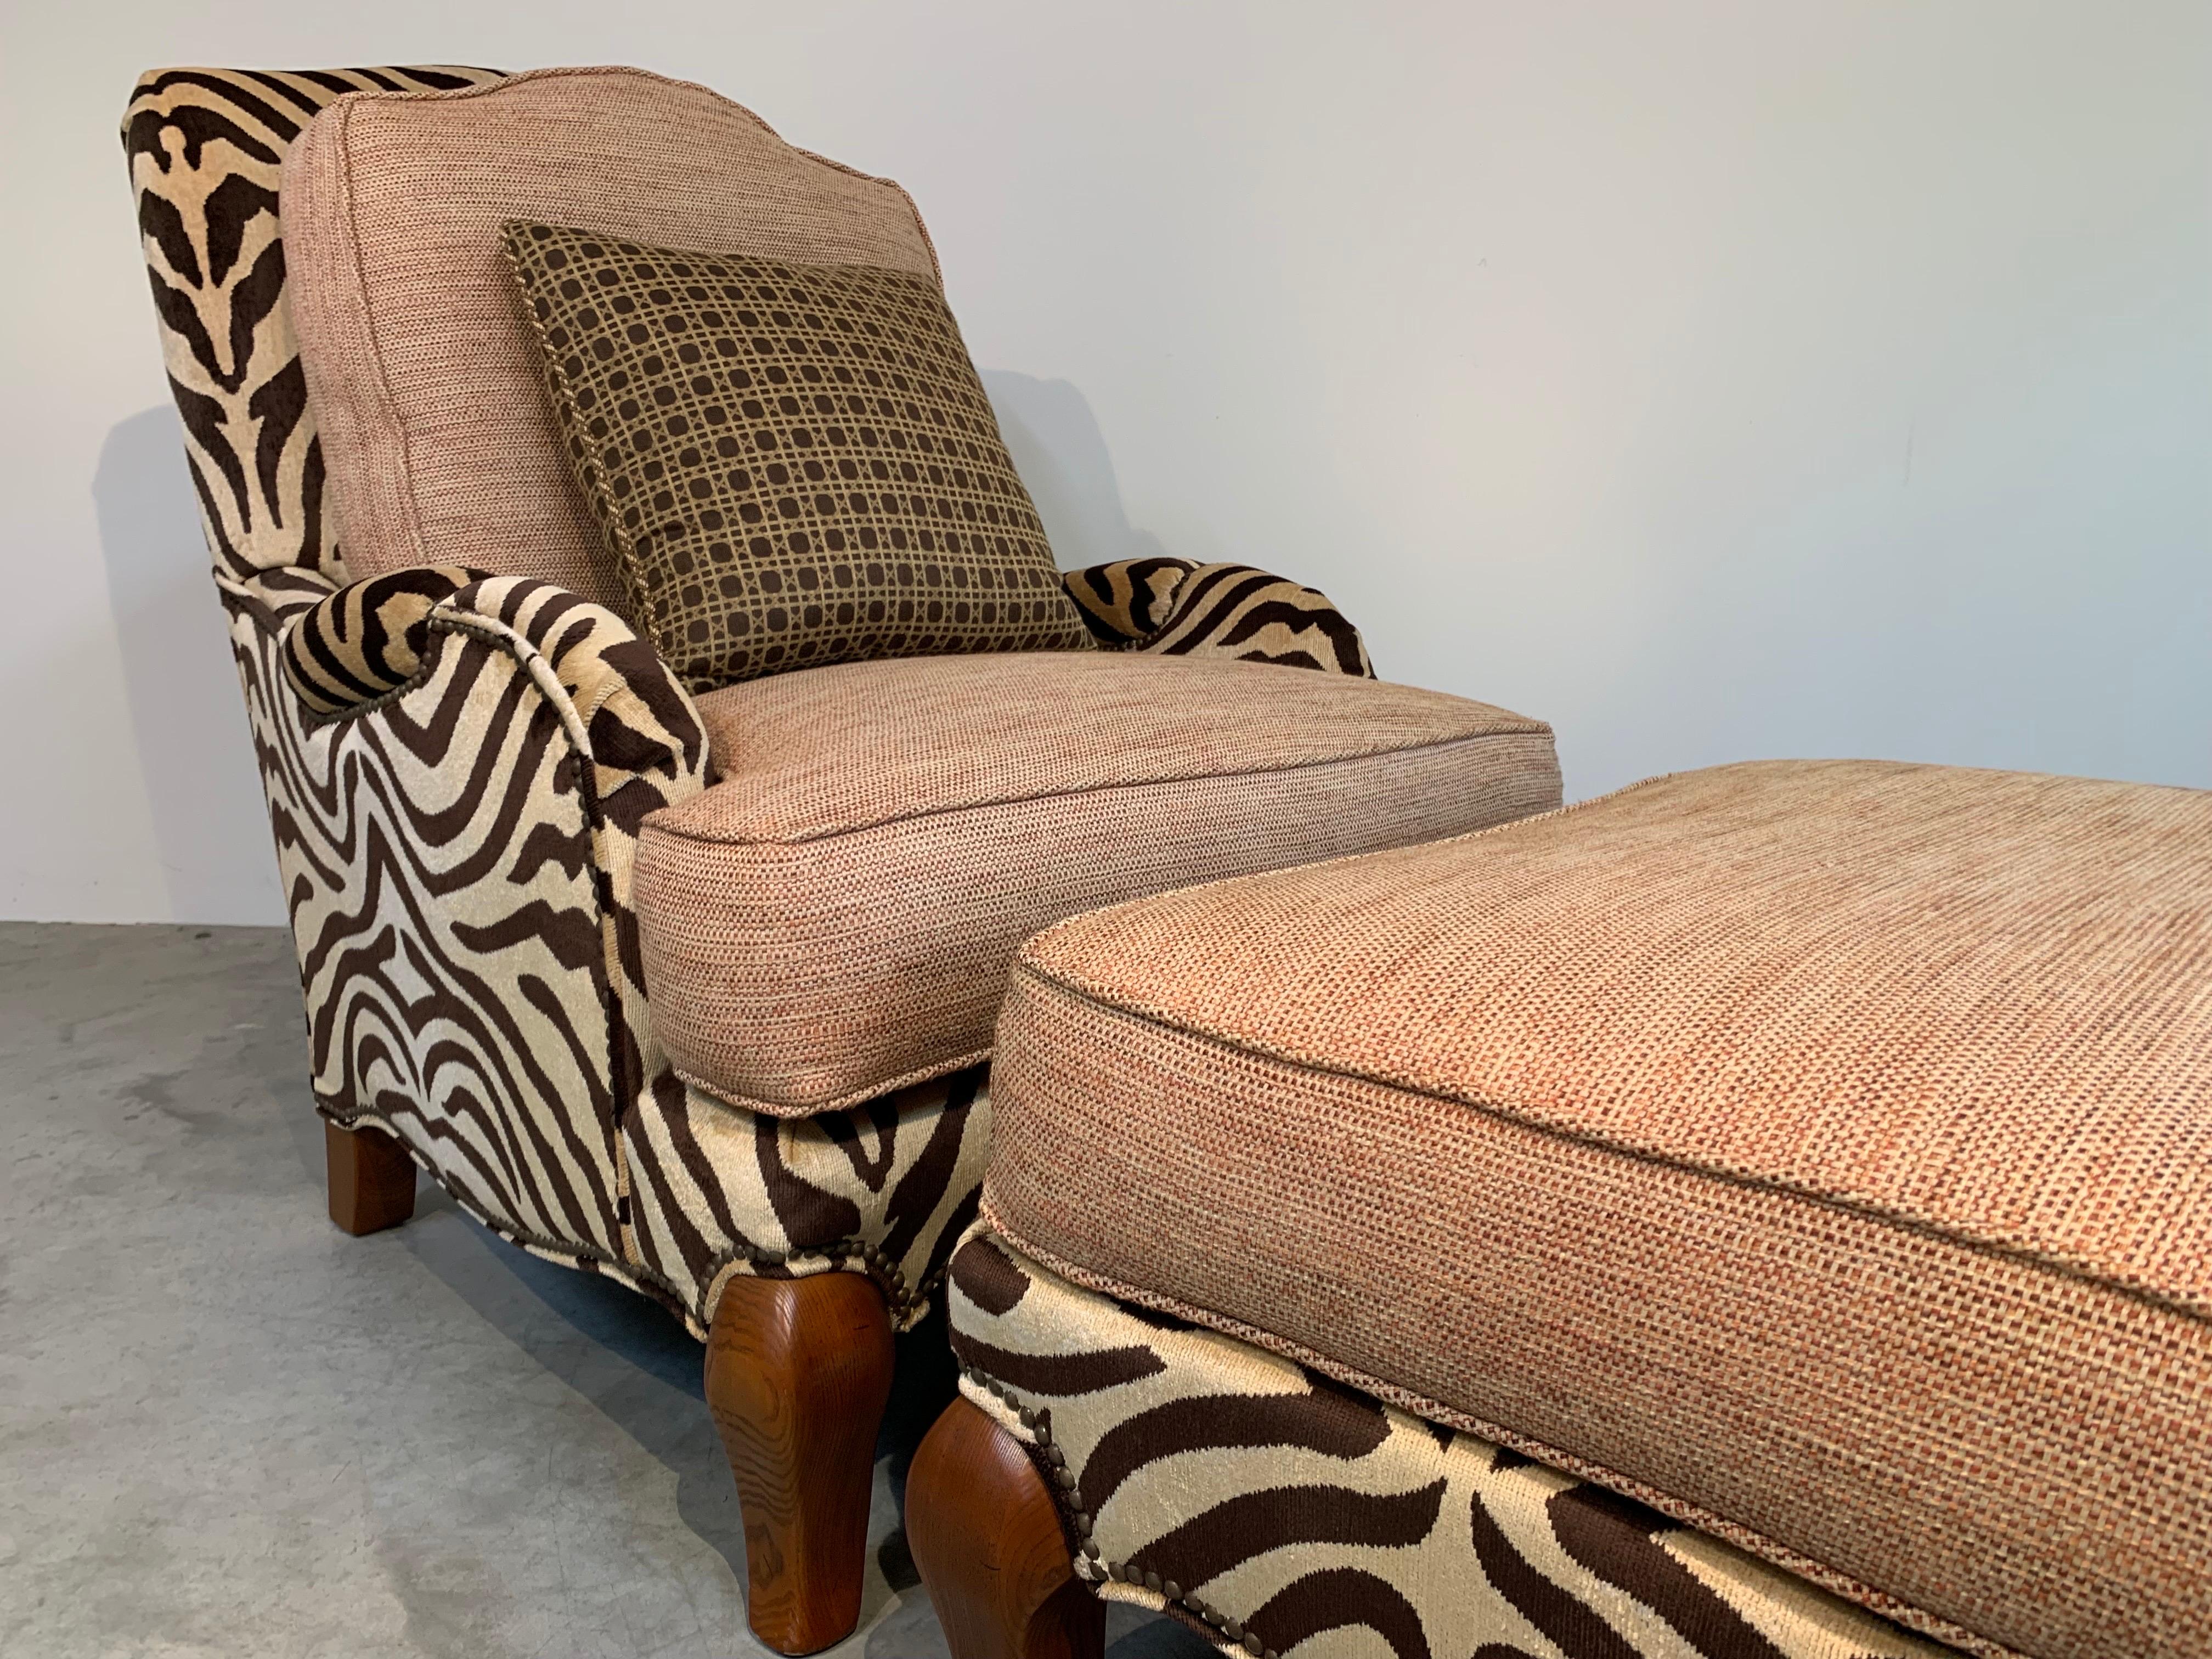 Stunning Pearson custom safari Bergere style lounge chair & ottoman having plush zebra pattern upholstery with waterfowl feather and duck down cushions combined with dense foam for firm yet soft comfort. Sculpted Bergere style solid maple legs